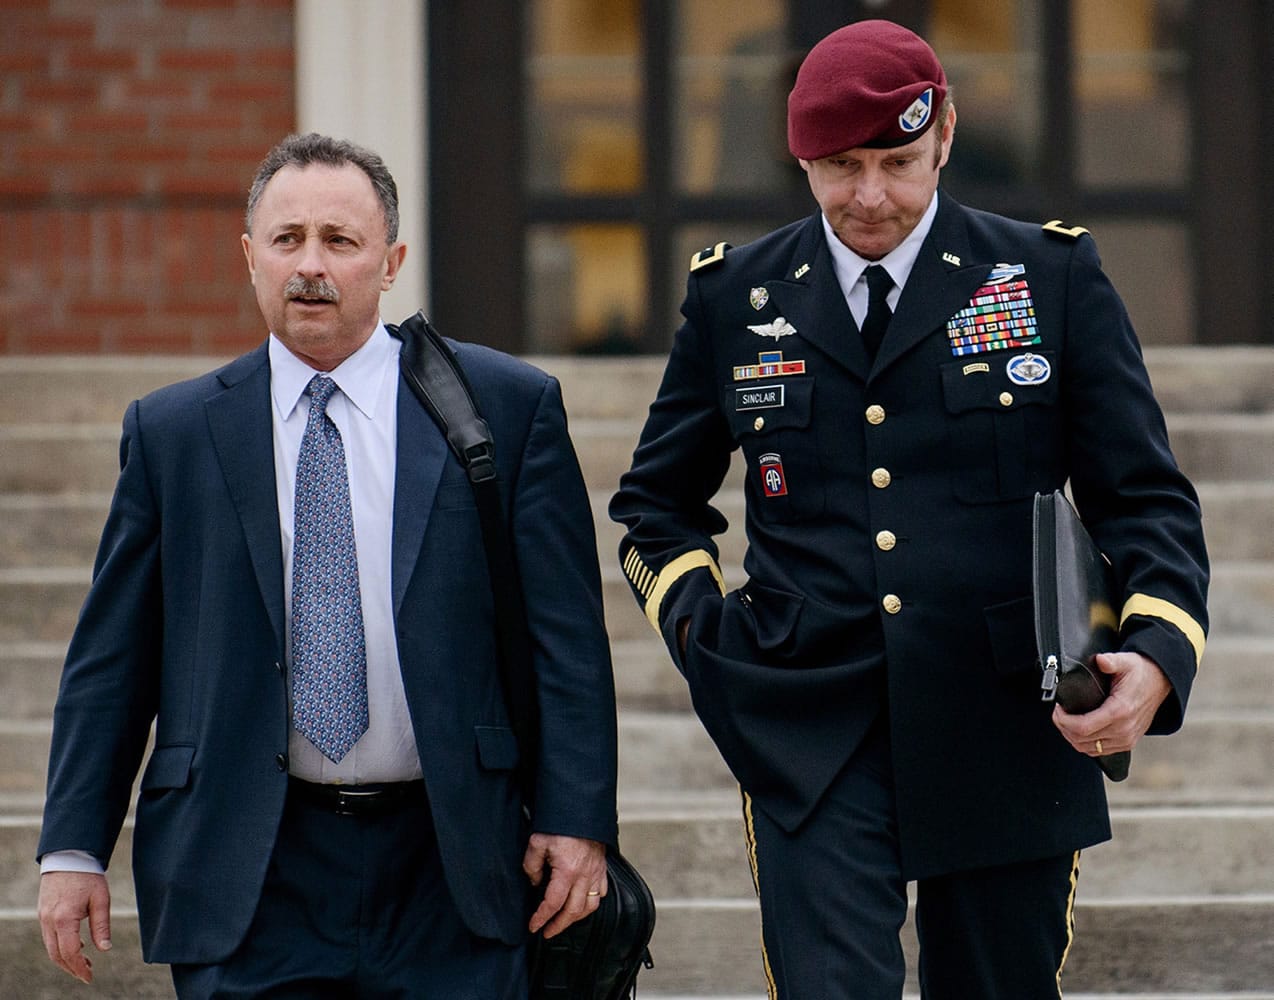 Brig. Gen. Jeffrey Sinclair, right, leaves the courthouse March 4 with his lawyers, Richard Scheff, left, and Ellen C.